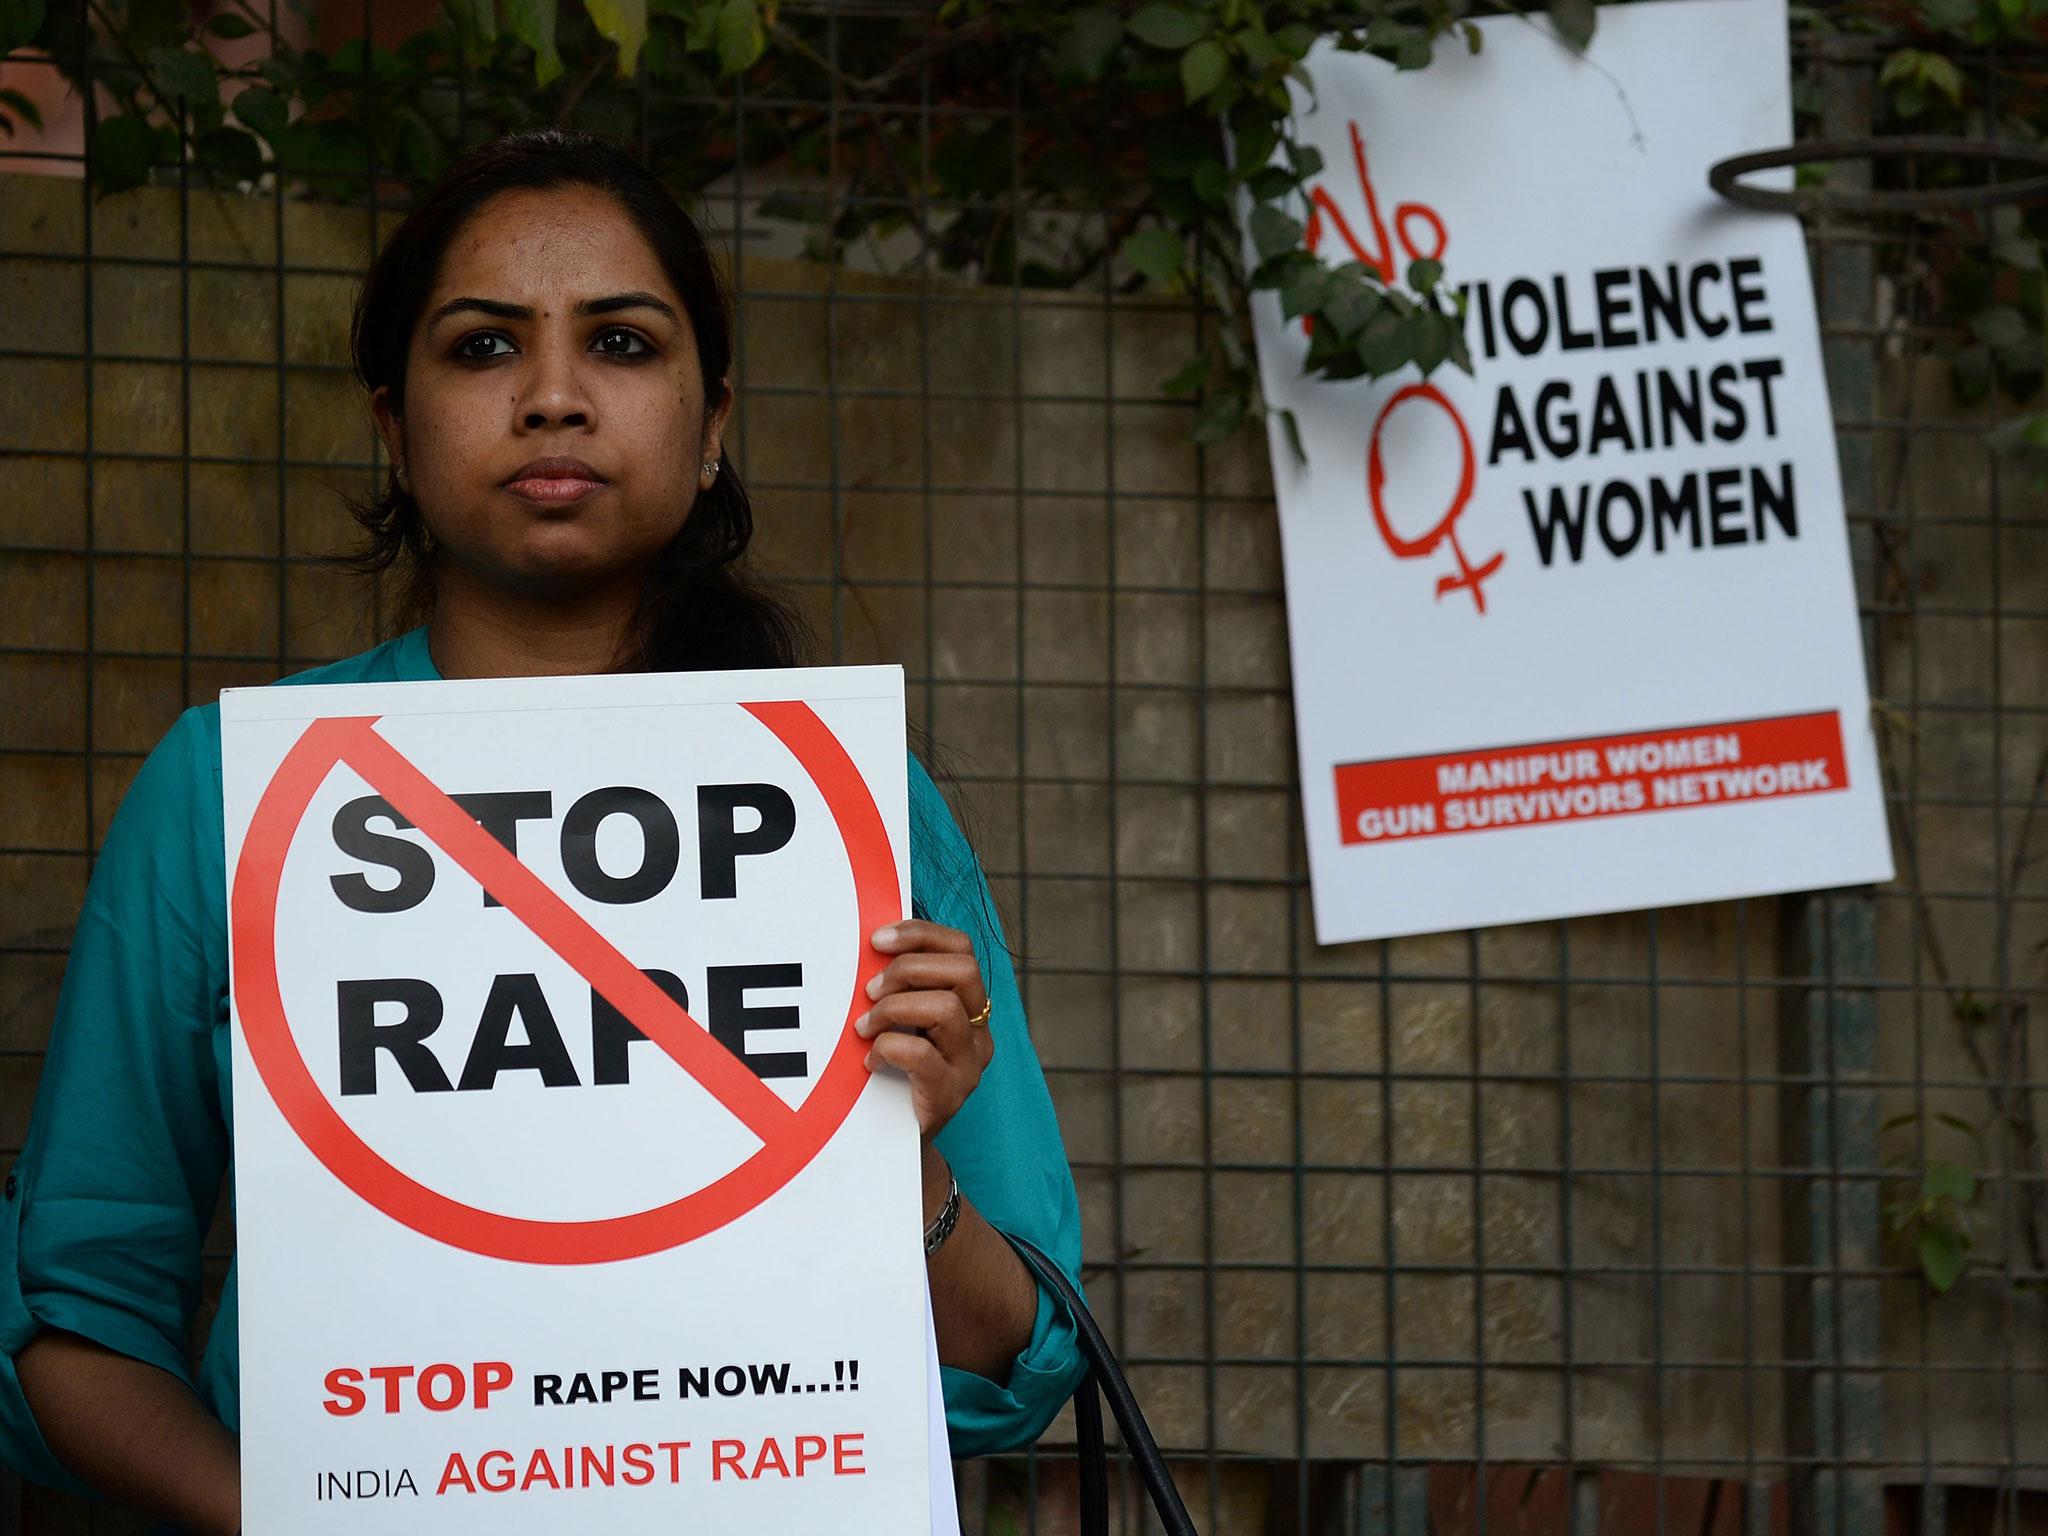 Sexual violence against women is a highly-charged issue in India